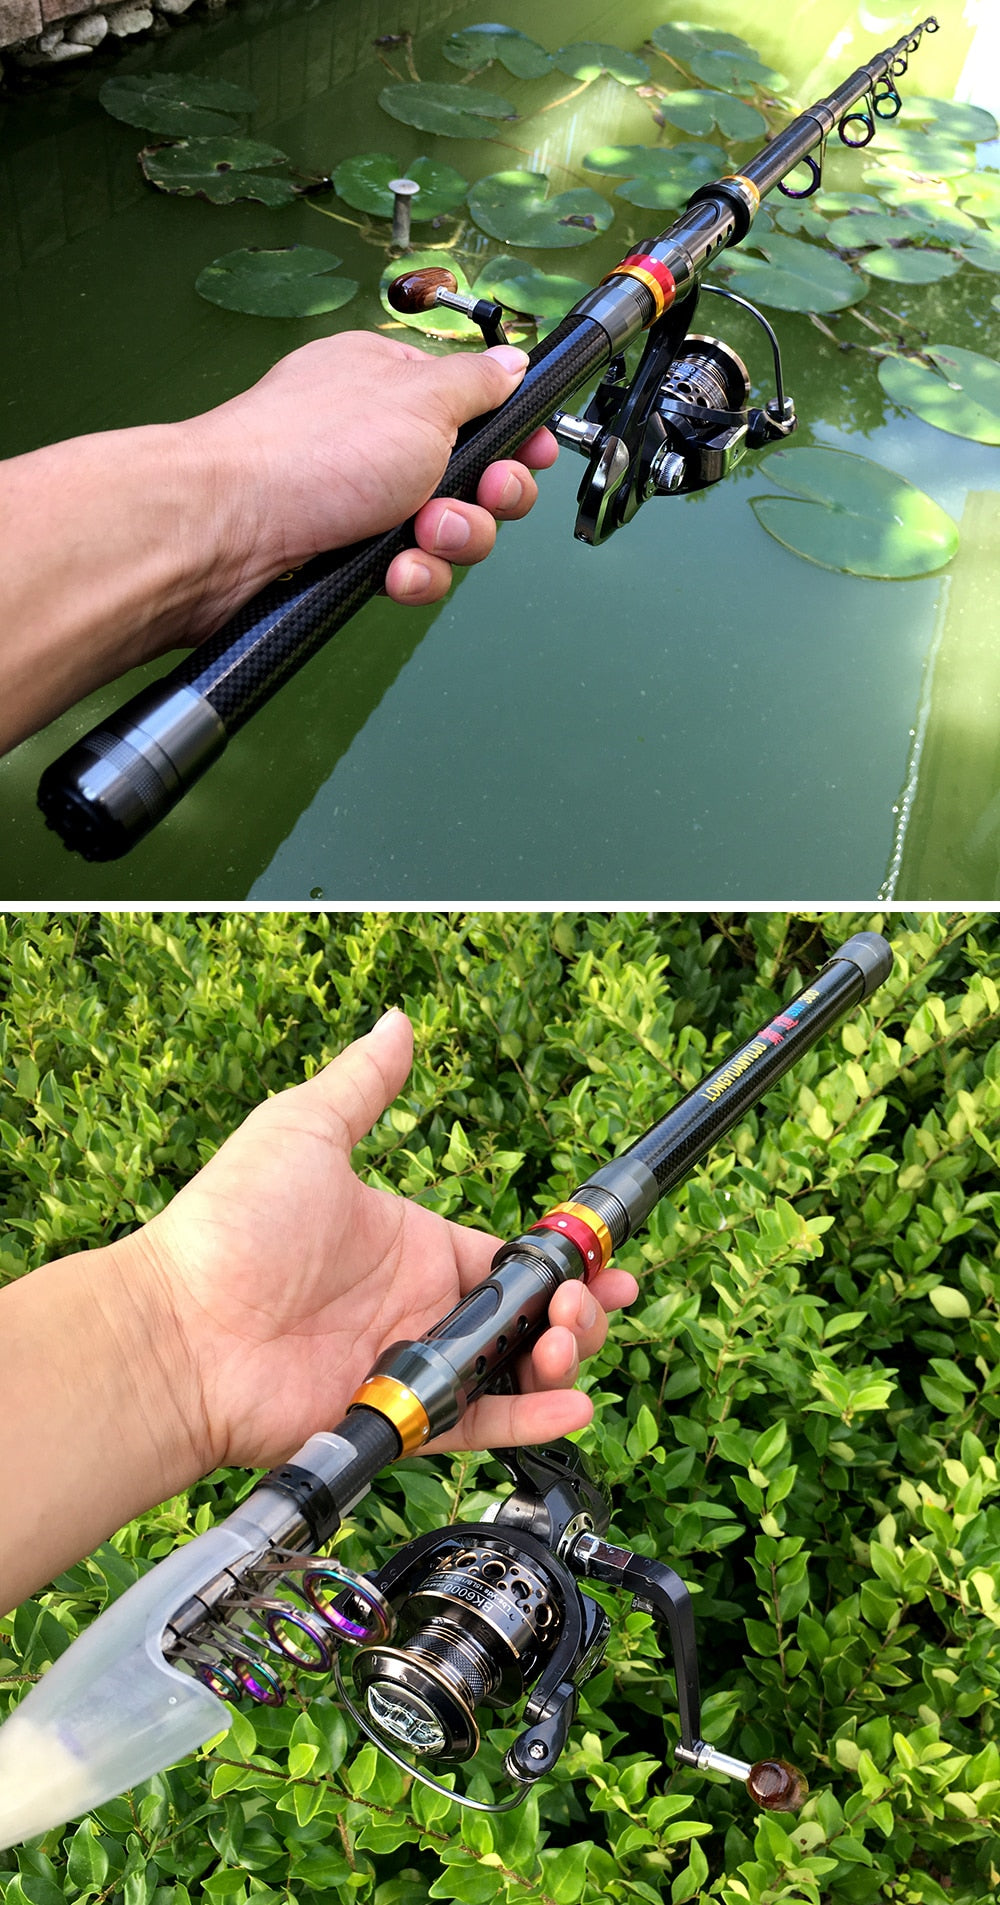 NEW 1.8m-3.6m Fishing Rod Combos Portable Telescopic Spinning Fishing Pole  Reel set for sea Rocky Travel Beginner fishing pesca